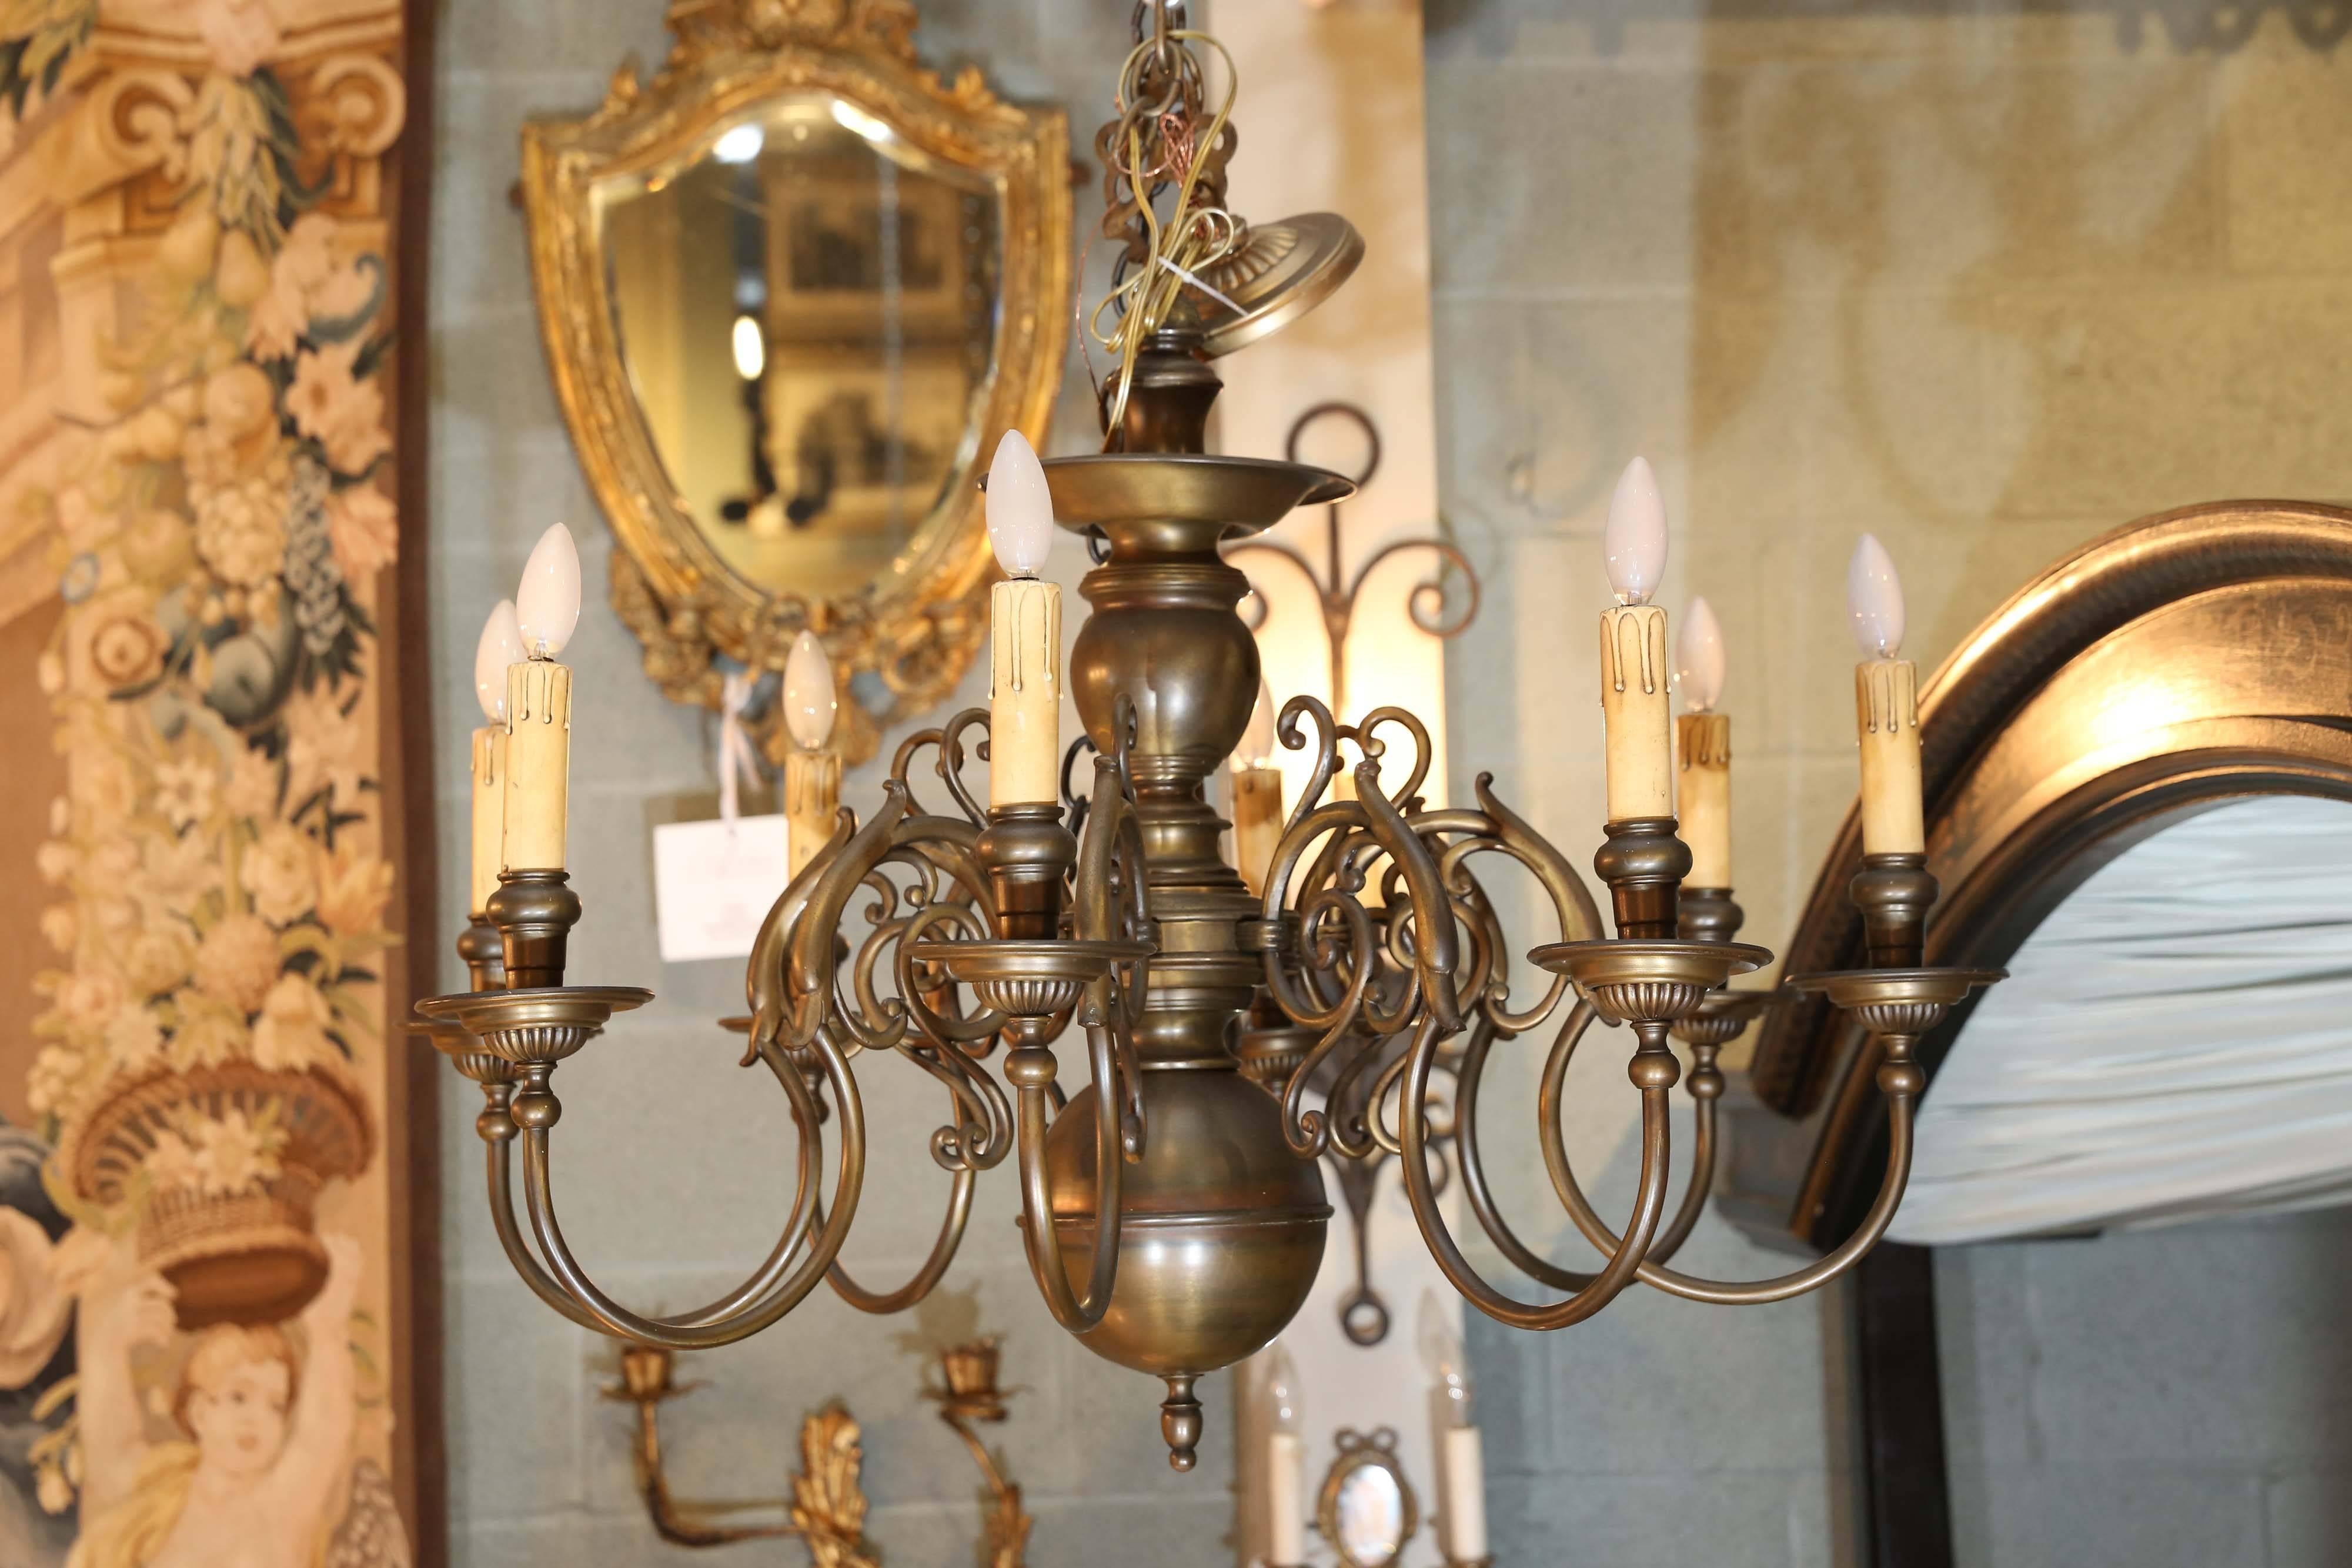 Brass chandelier has lovely spiraling arms and very handsomely detailed fluted bobeches and candleholders.

A finial is featured at the bottom.